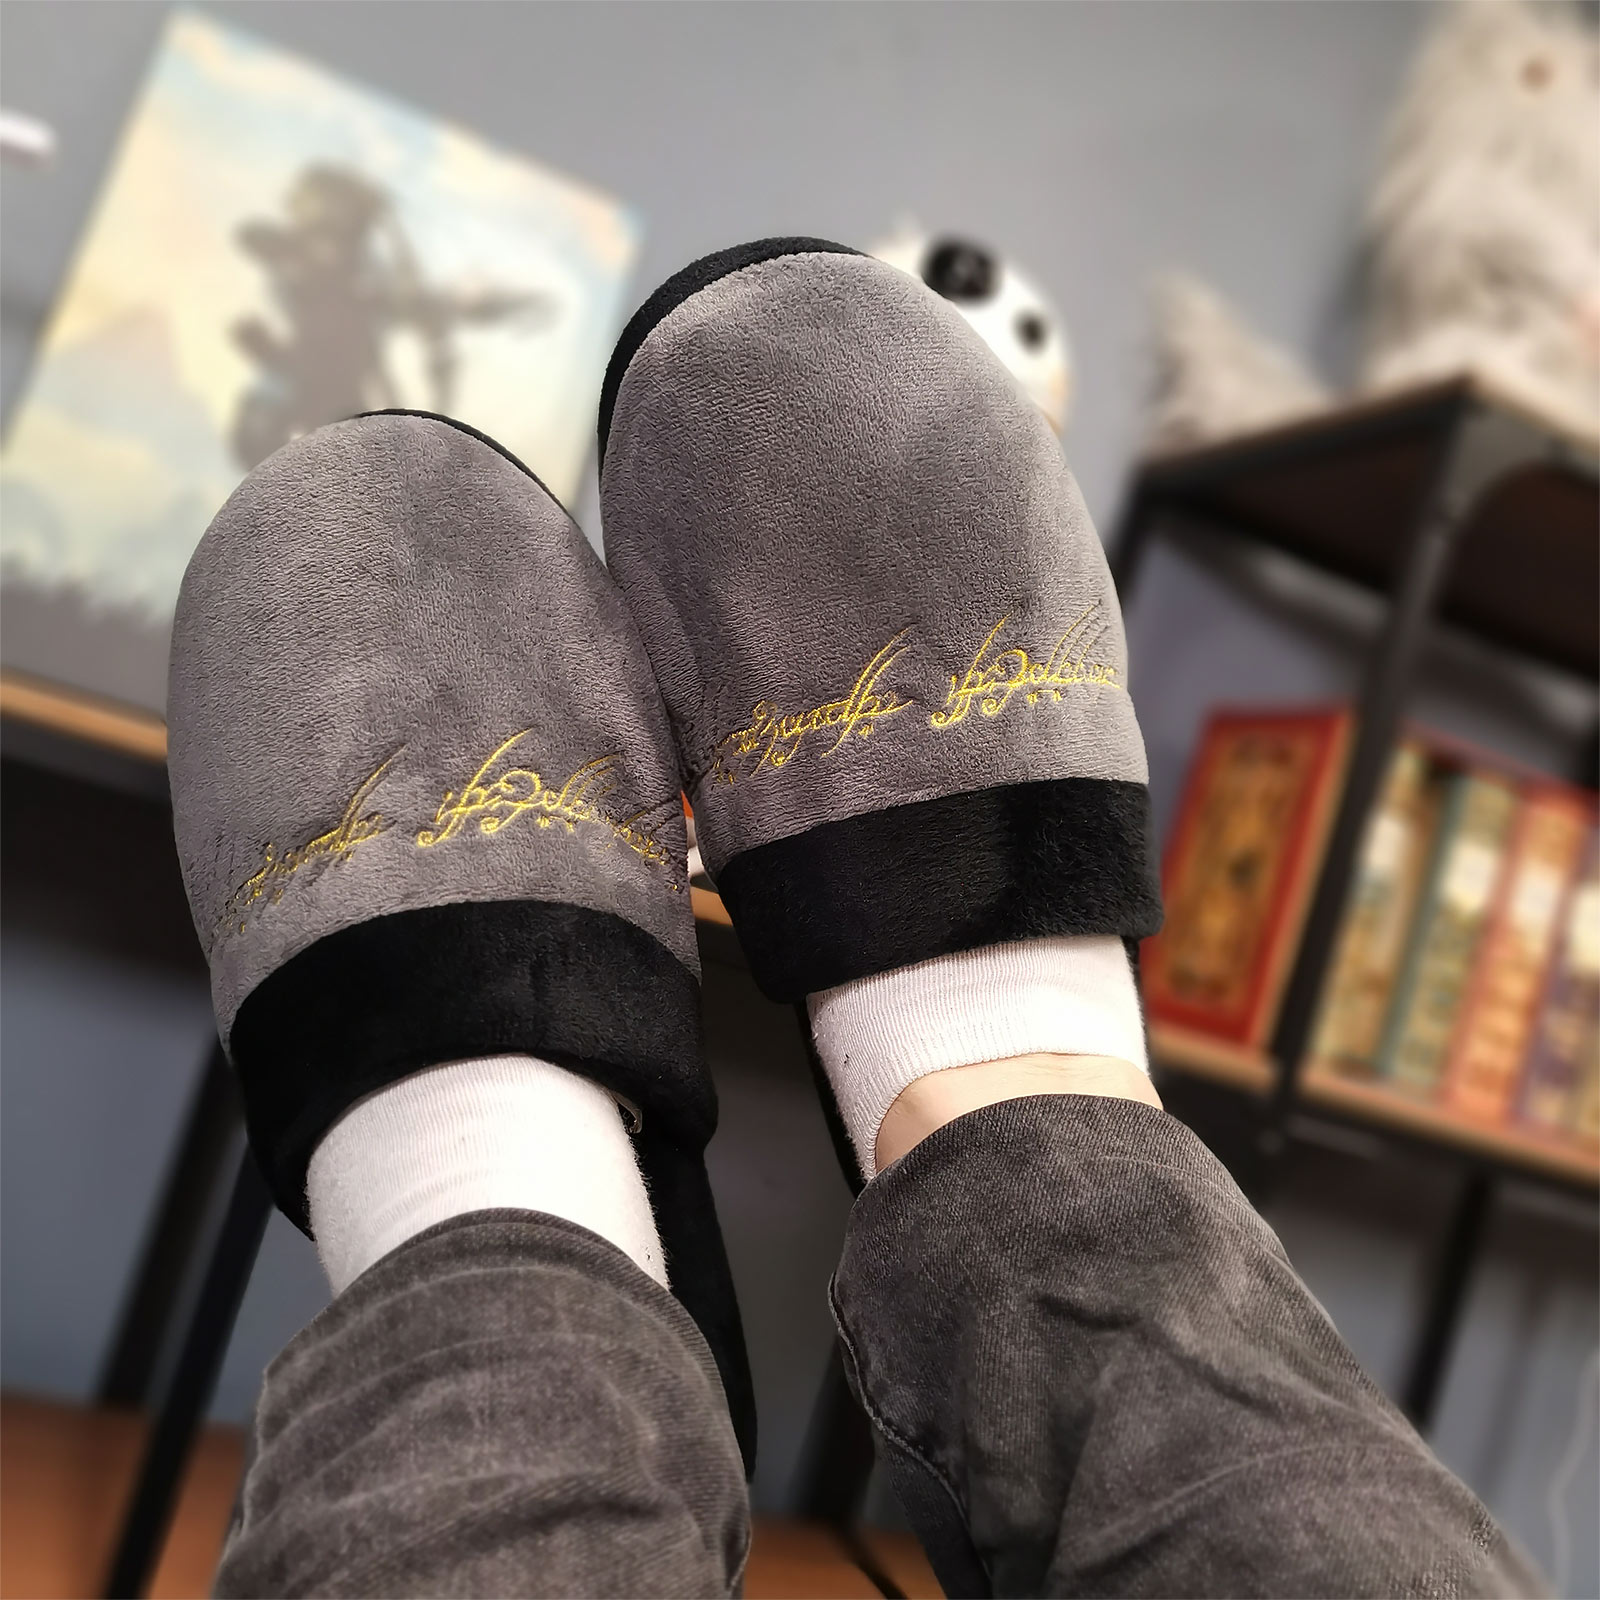 Lord of the Rings - The One Ring Slippers